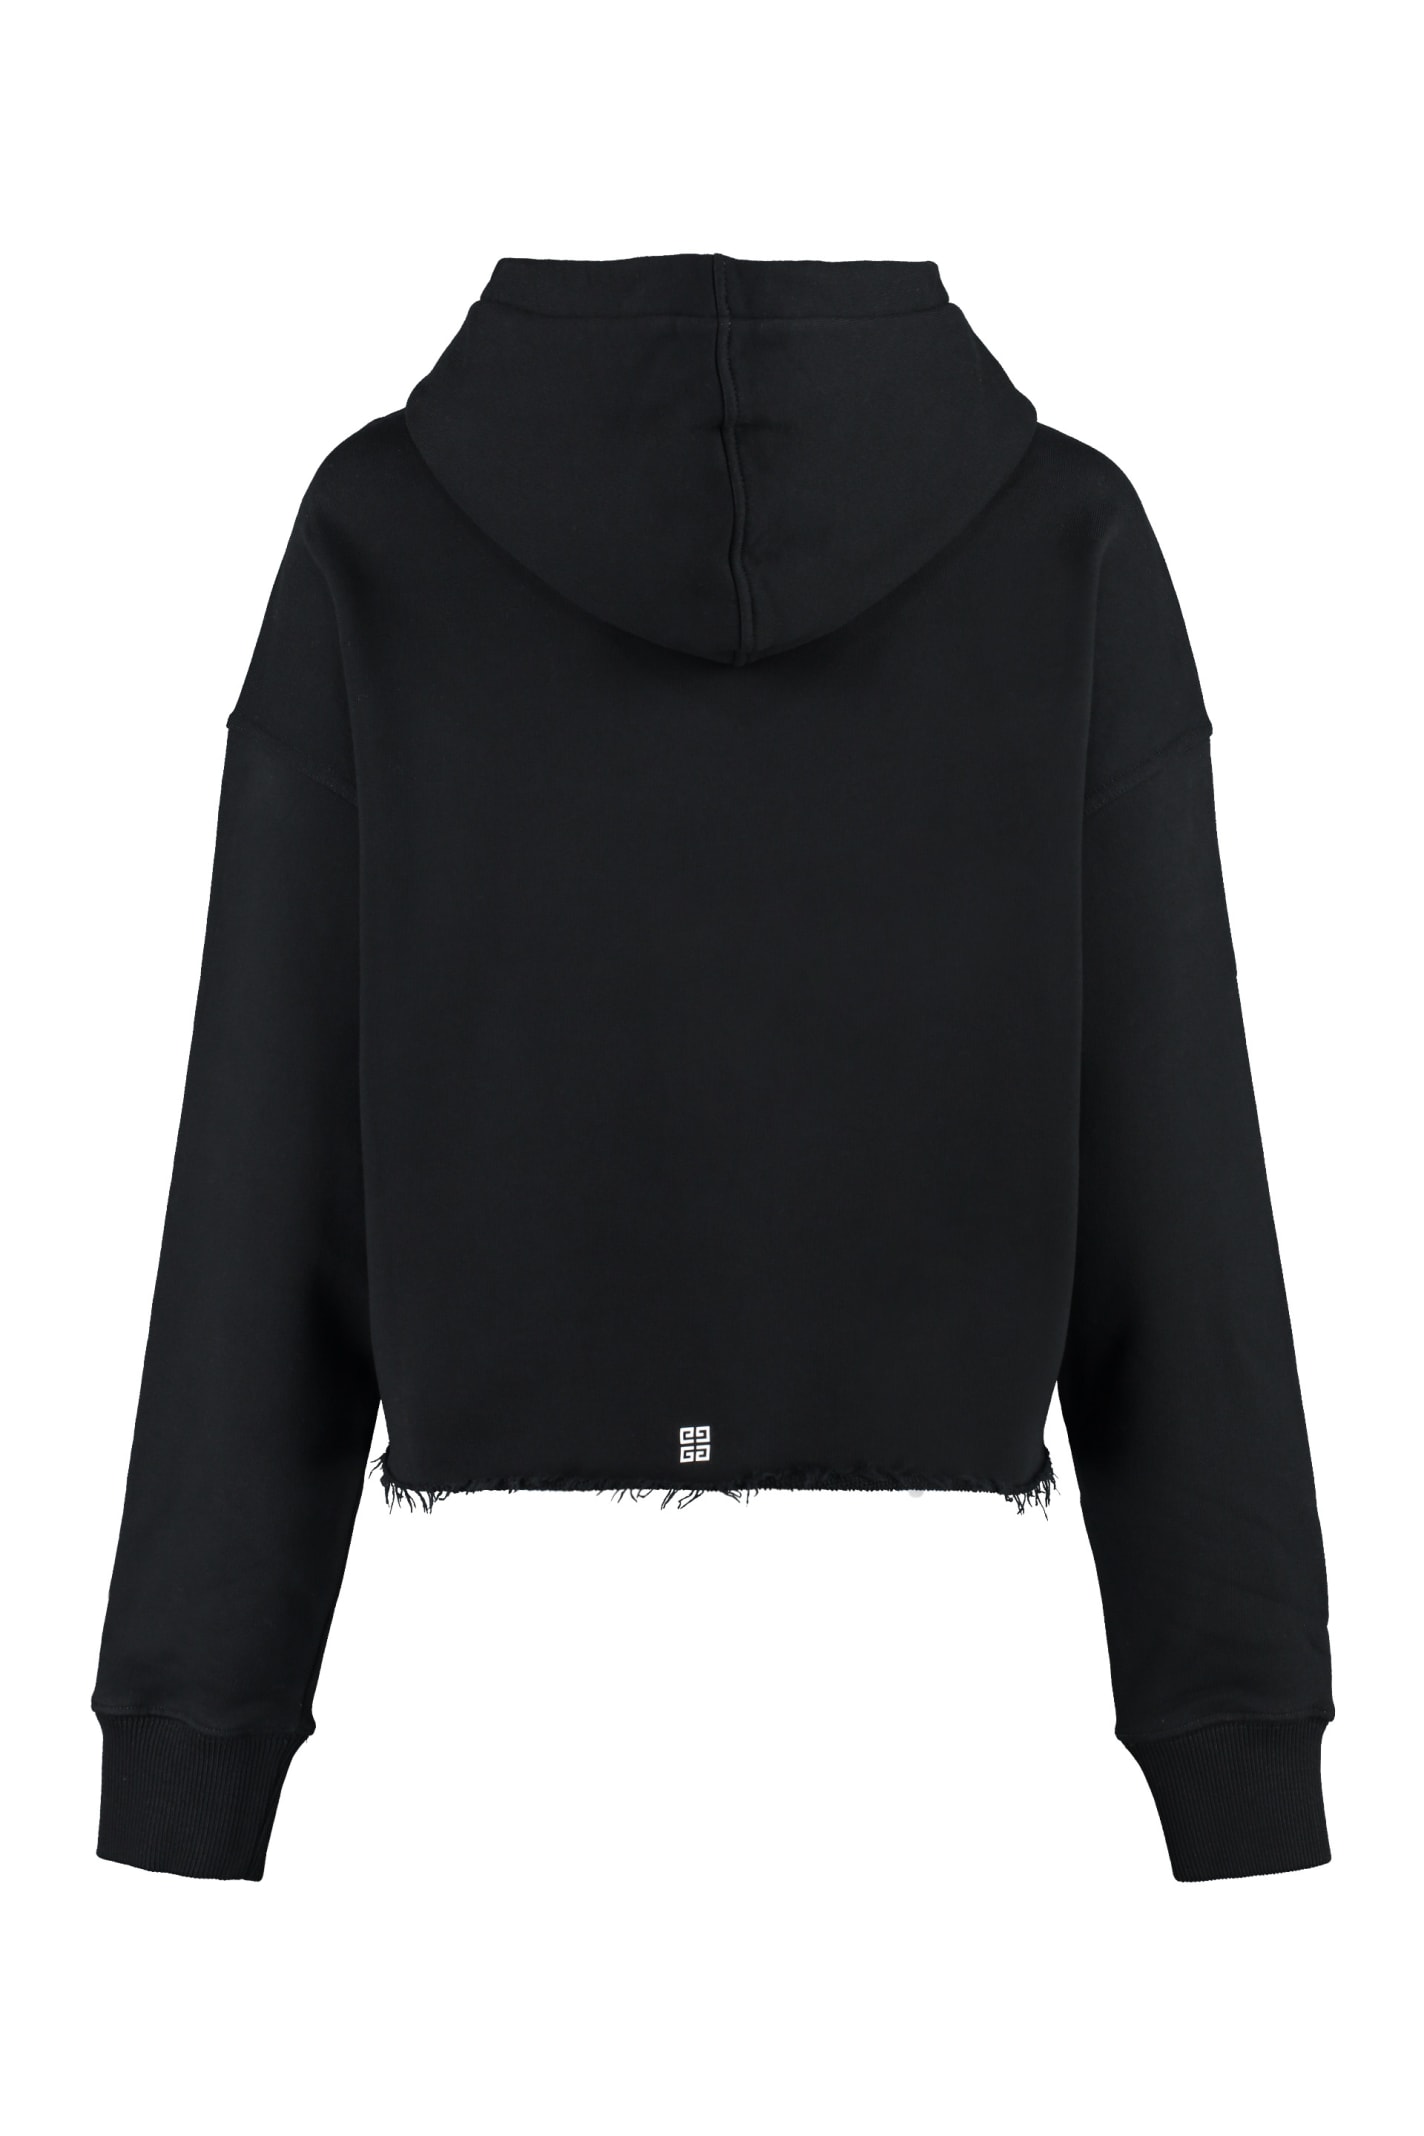 Shop Givenchy Cotton Hoodie In Black